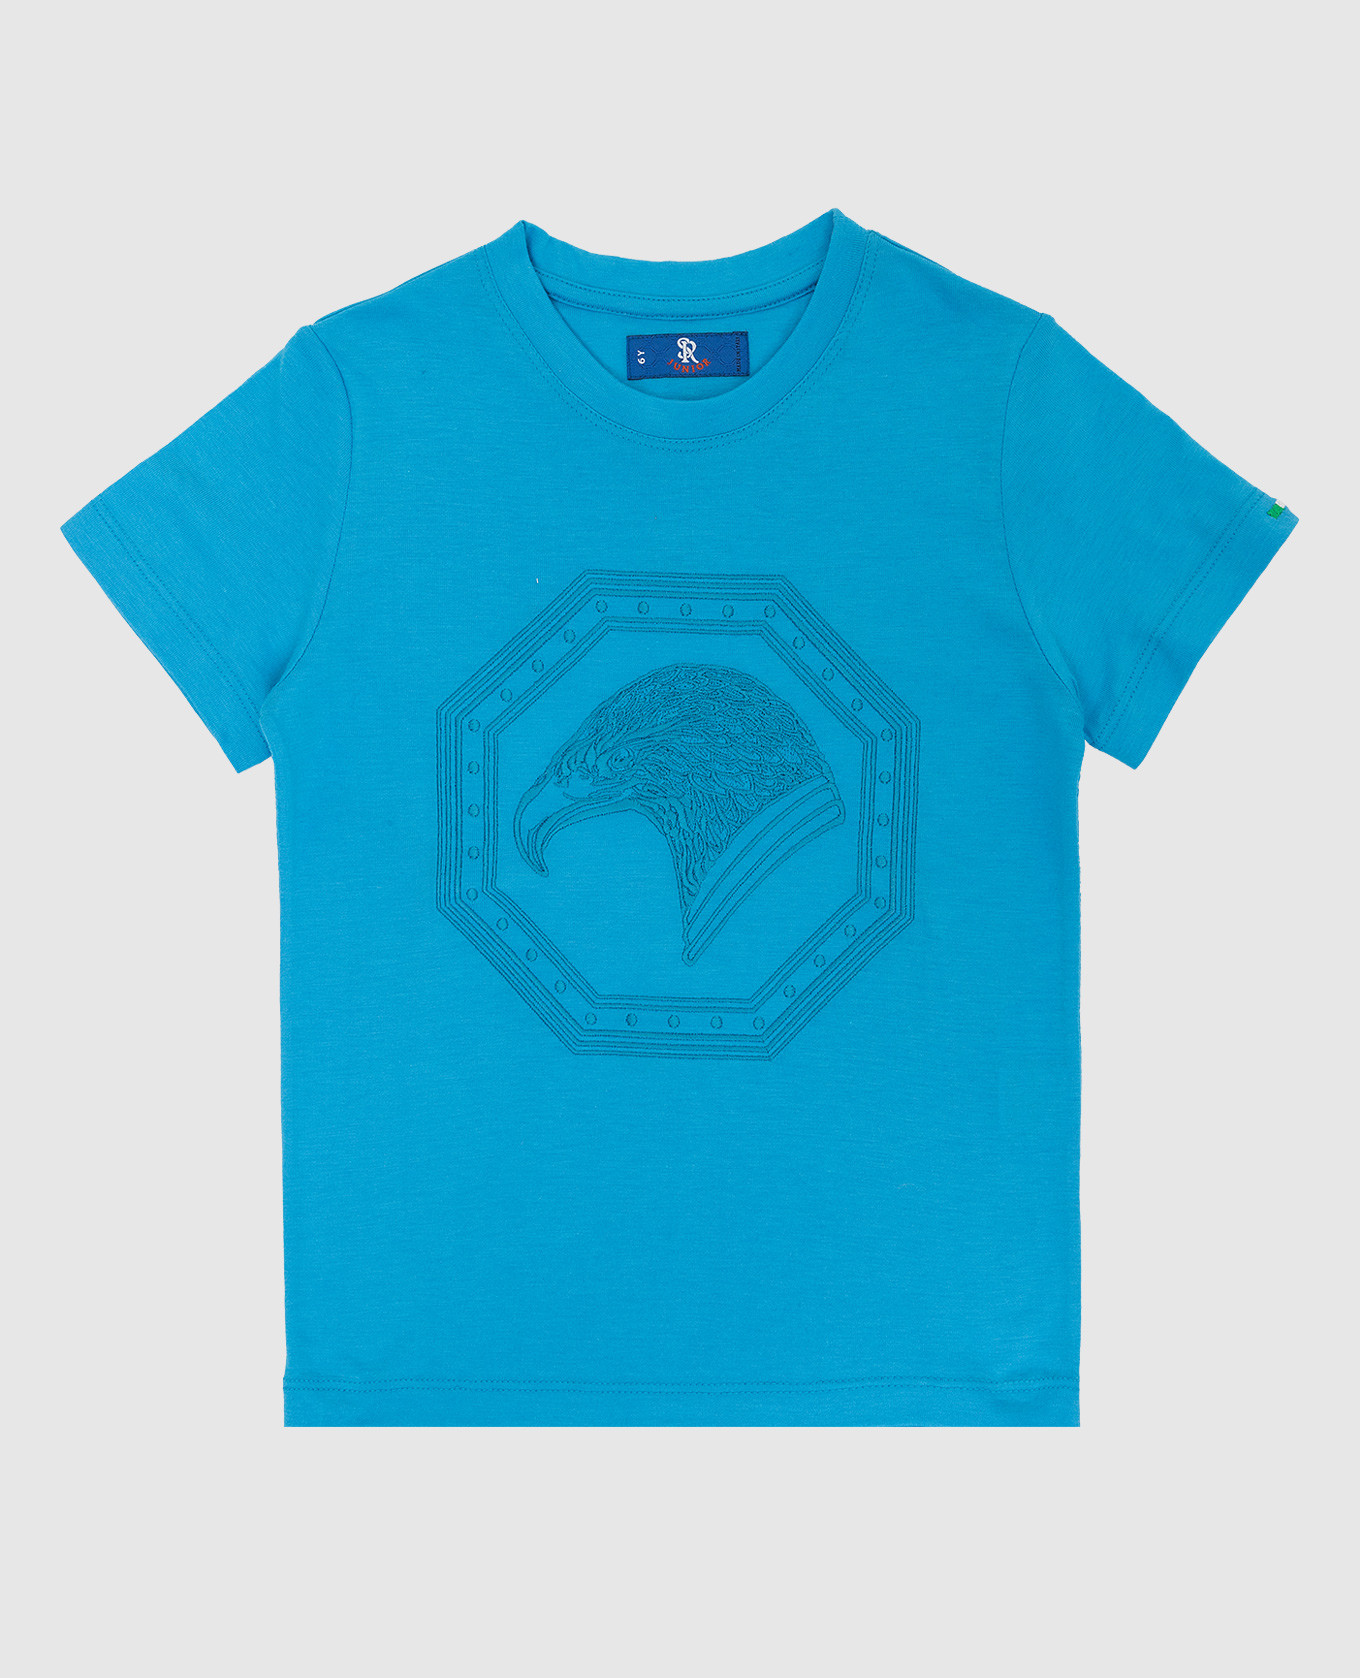 Children's light turquoise t-shirt with embroidery